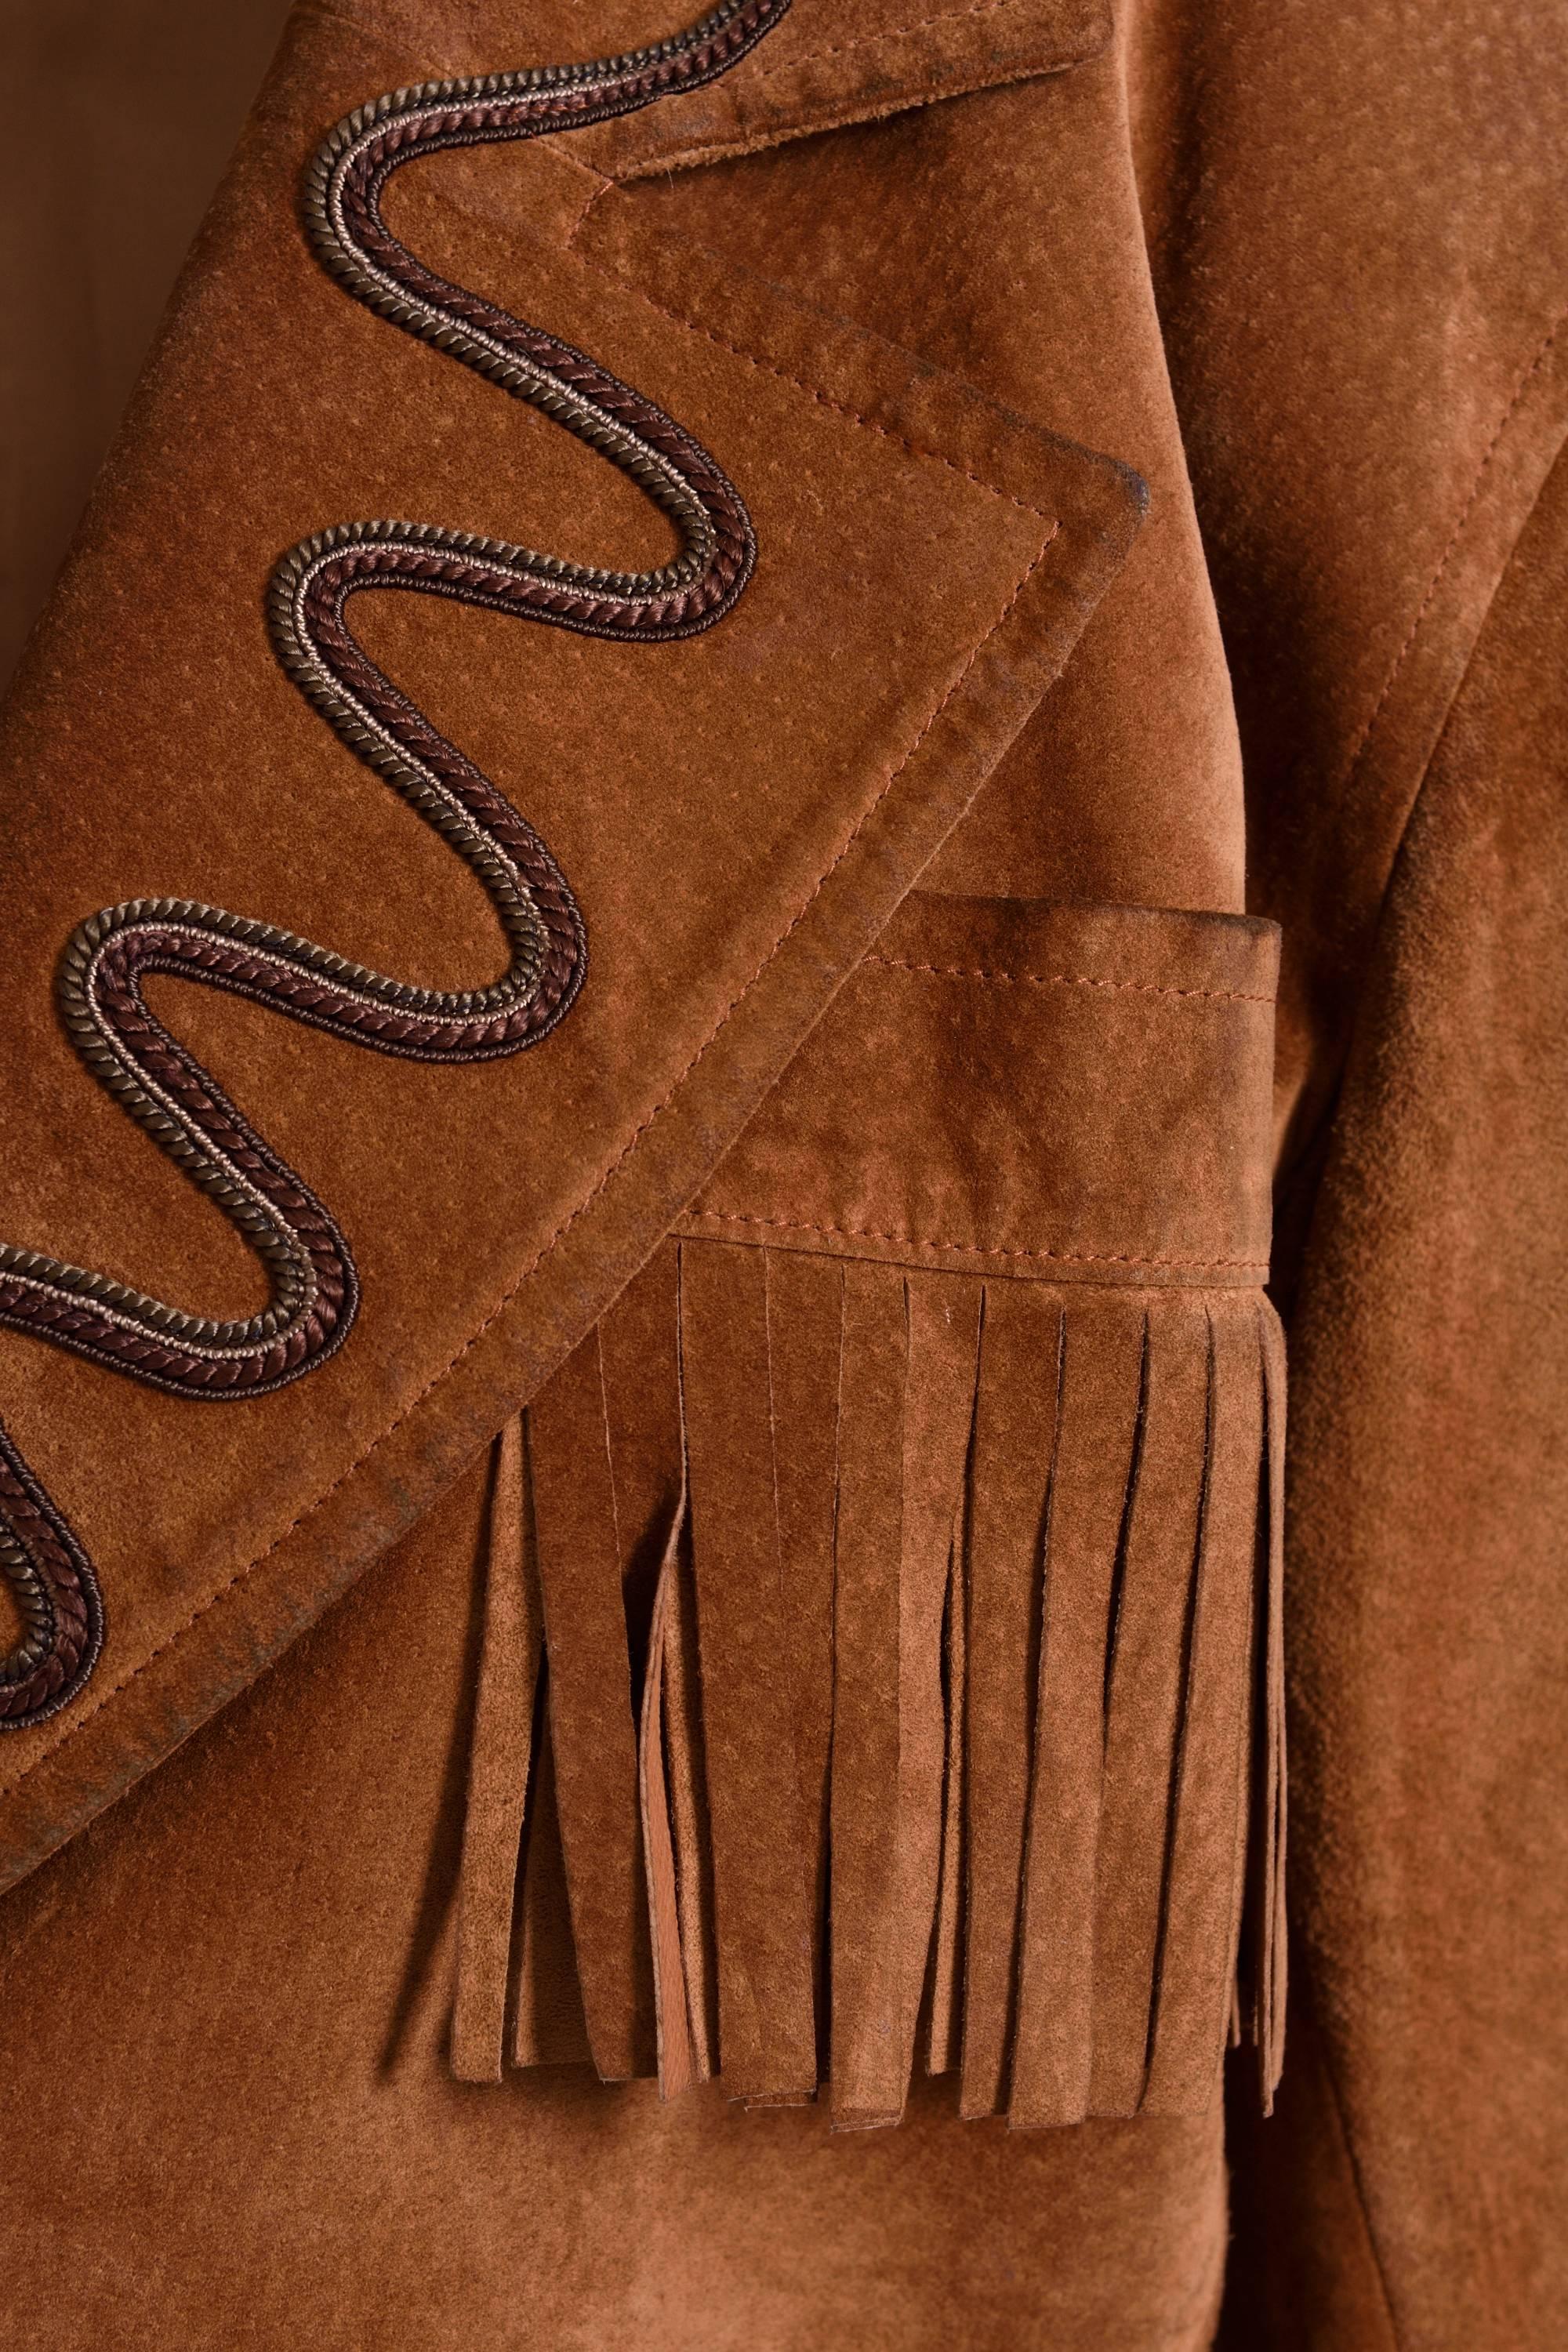 YVES SAINT LAURENT Rive Gauche Brown Suede Leather Fringe Jacket In Good Condition For Sale In Milan, Italy